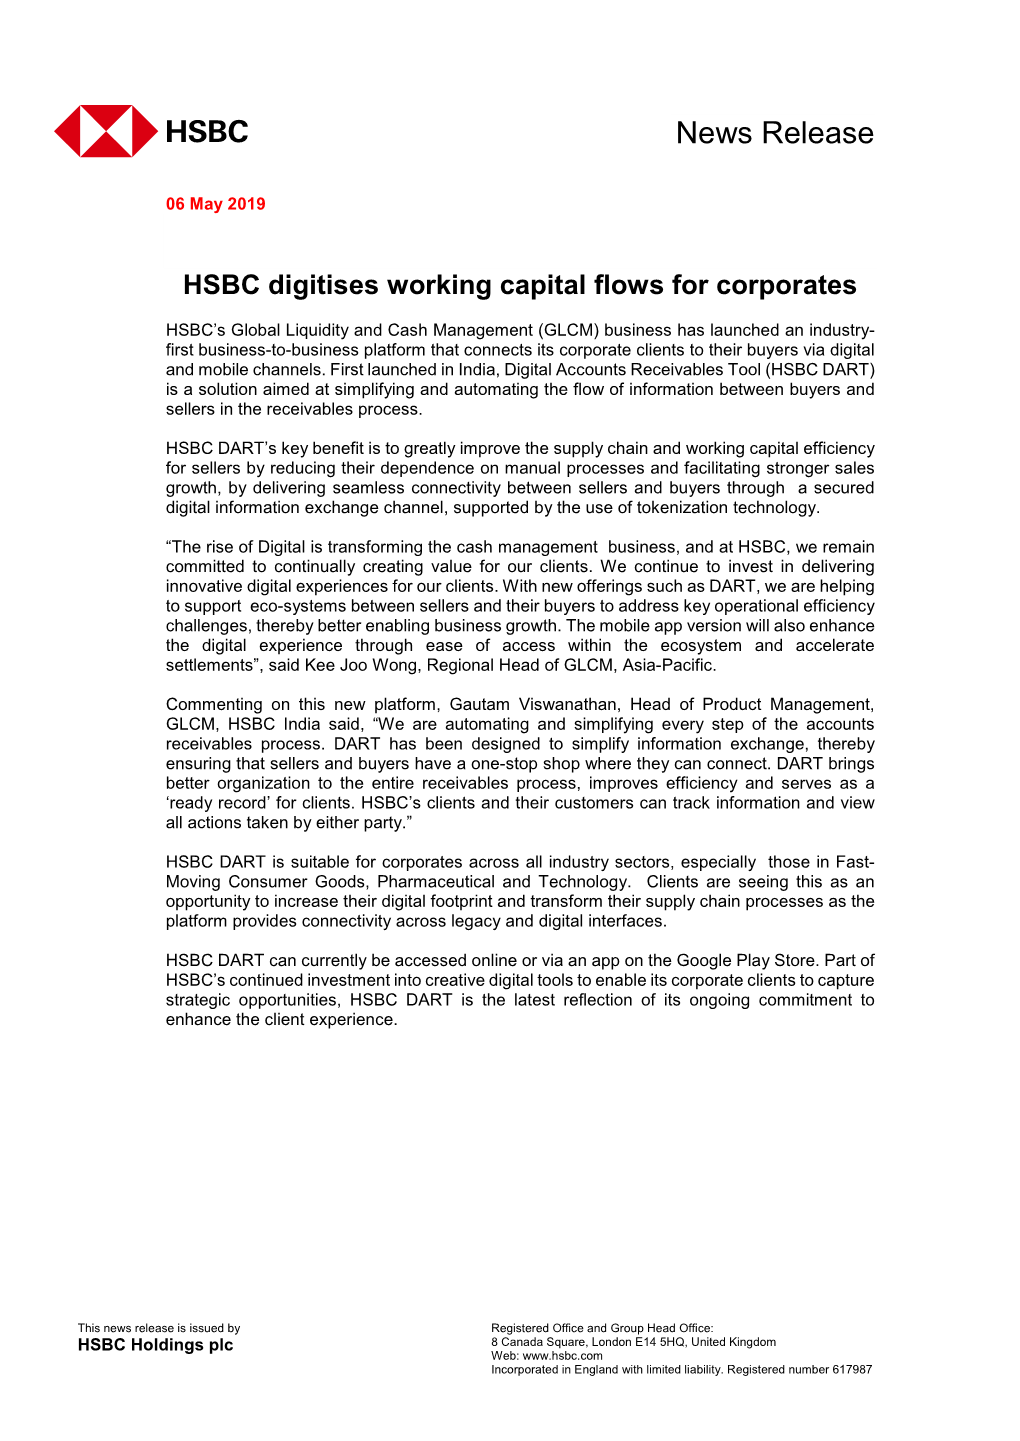 HSBC Digitises Working Capital Flows for Corporates